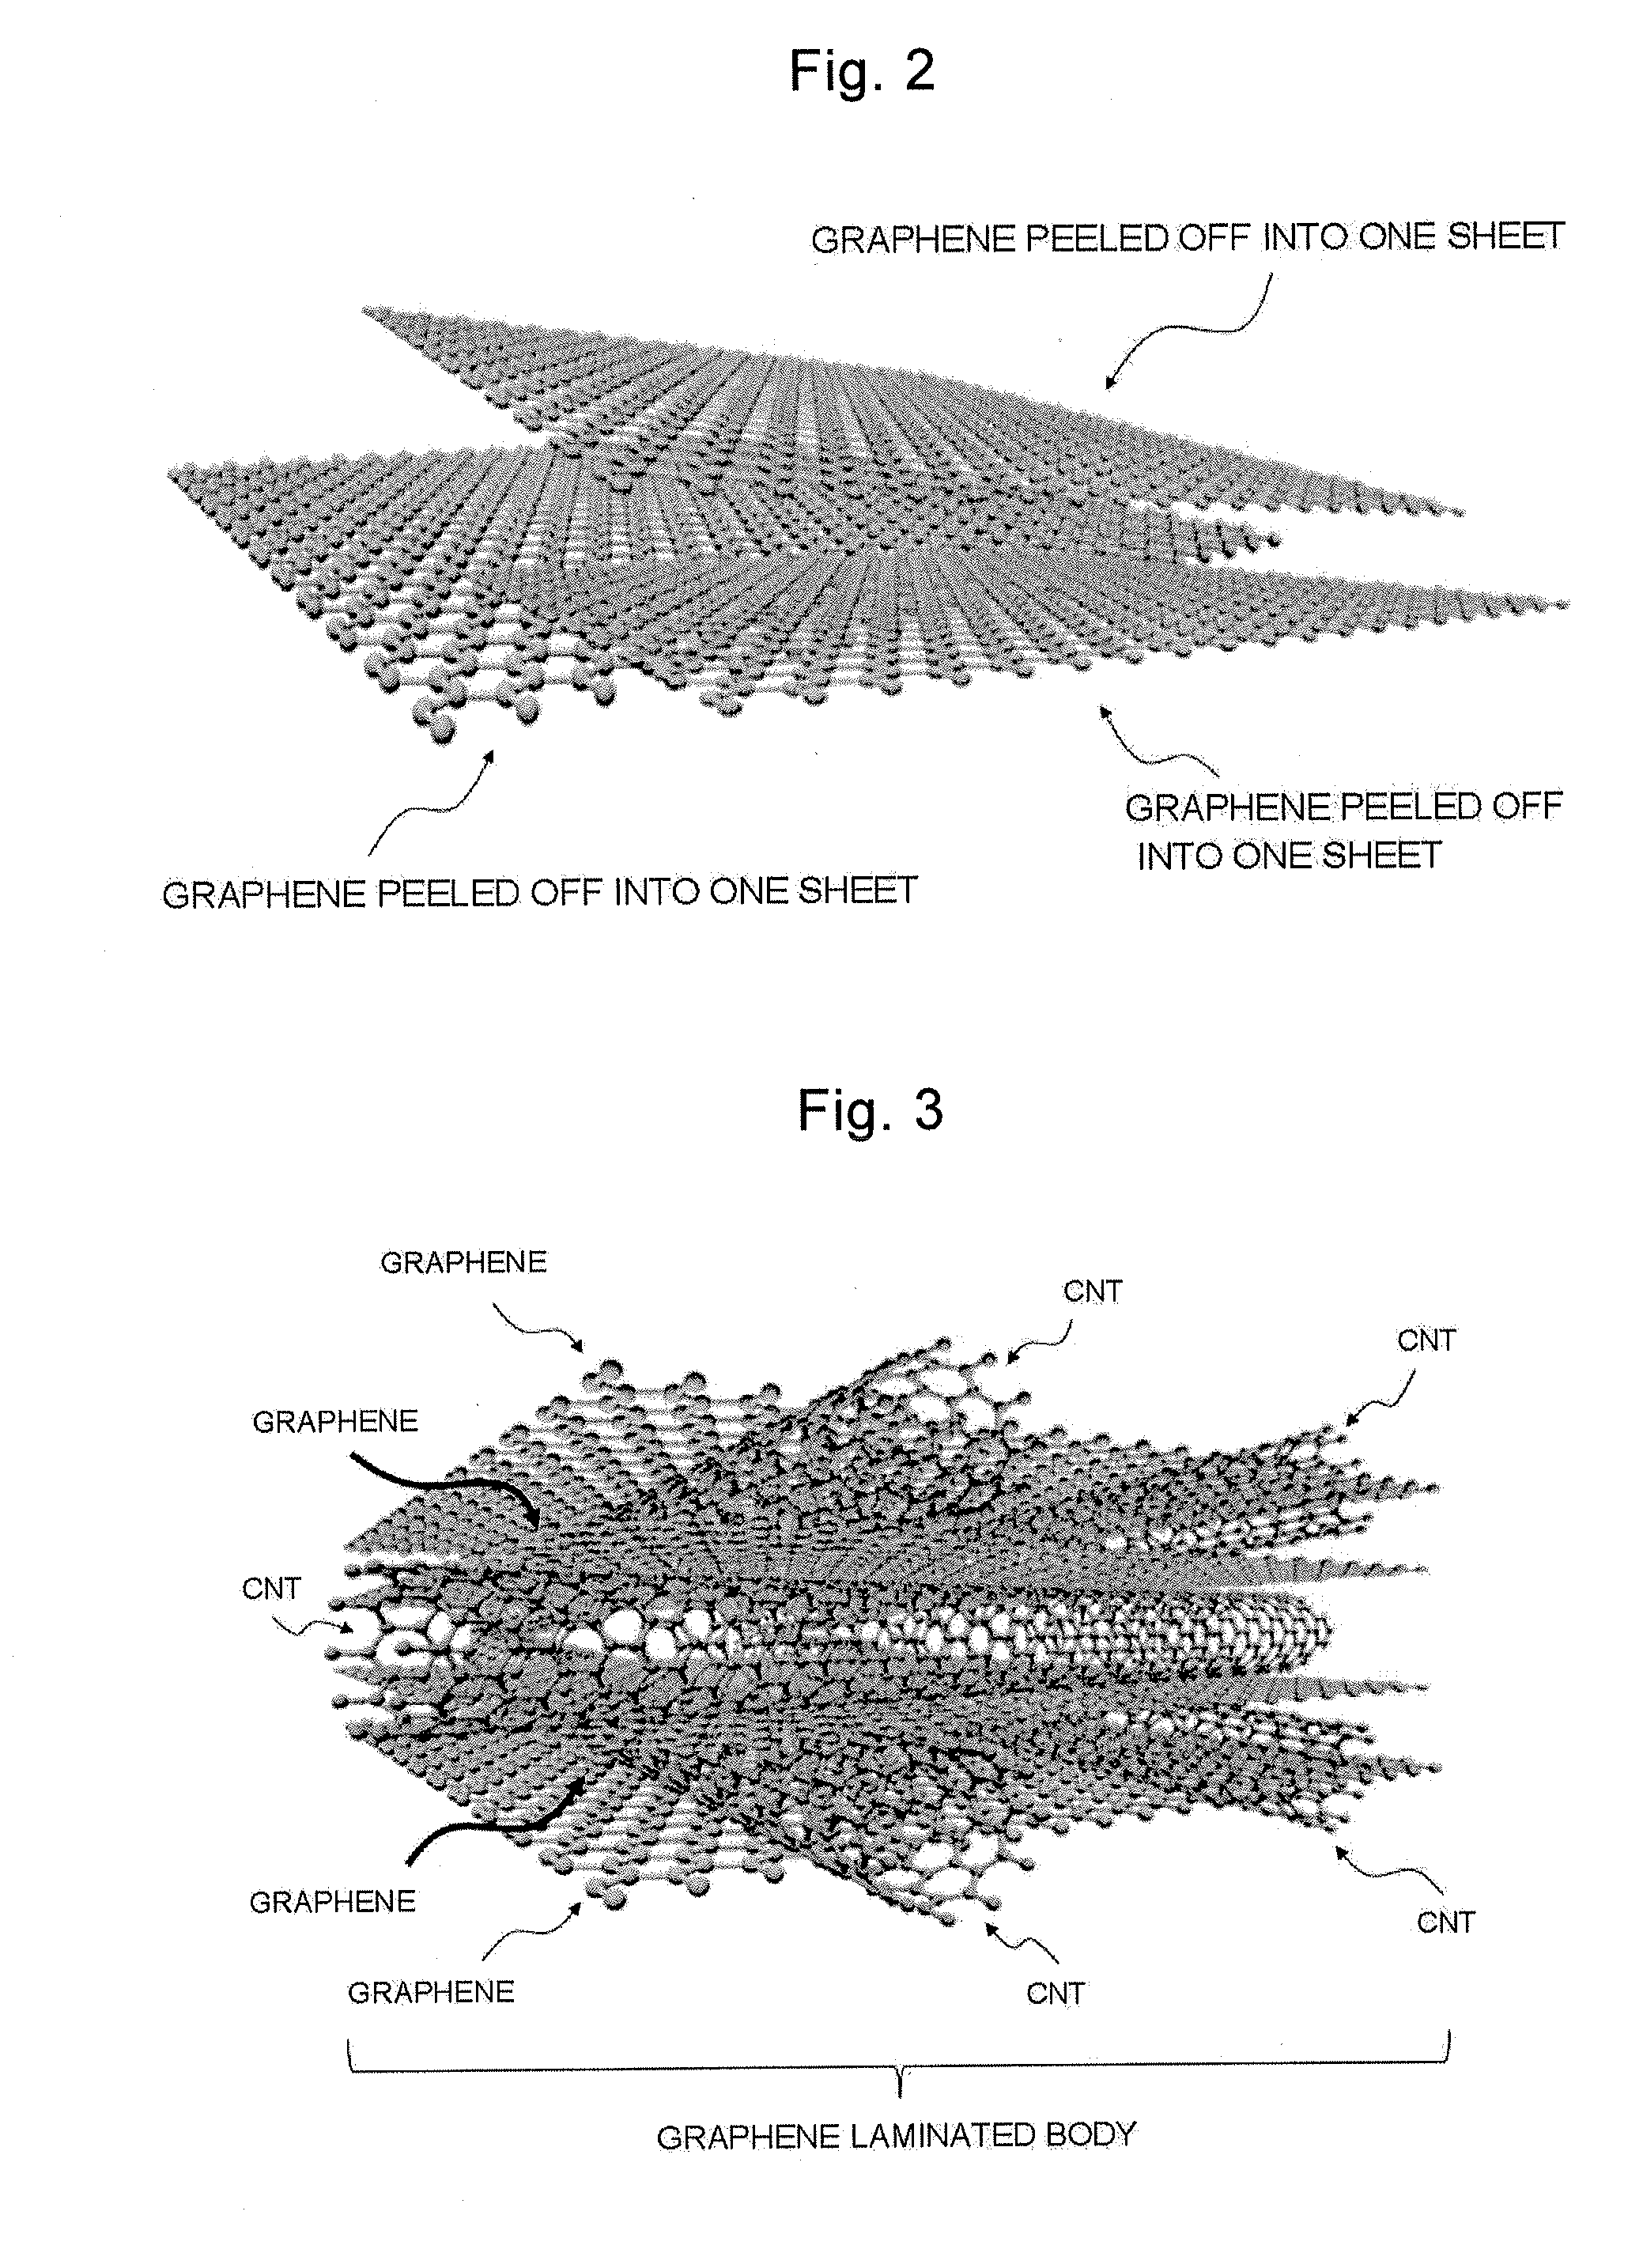 Linked stacks of partly reduced graphene, method for producing linked stacks of partly reduced graphene, powder comprising linked stacks of partly reduced graphene, film comprising linked stacks of partly reduced graphene, graphene electrode film, method for producing graphene electrode film, and graphene capacitor